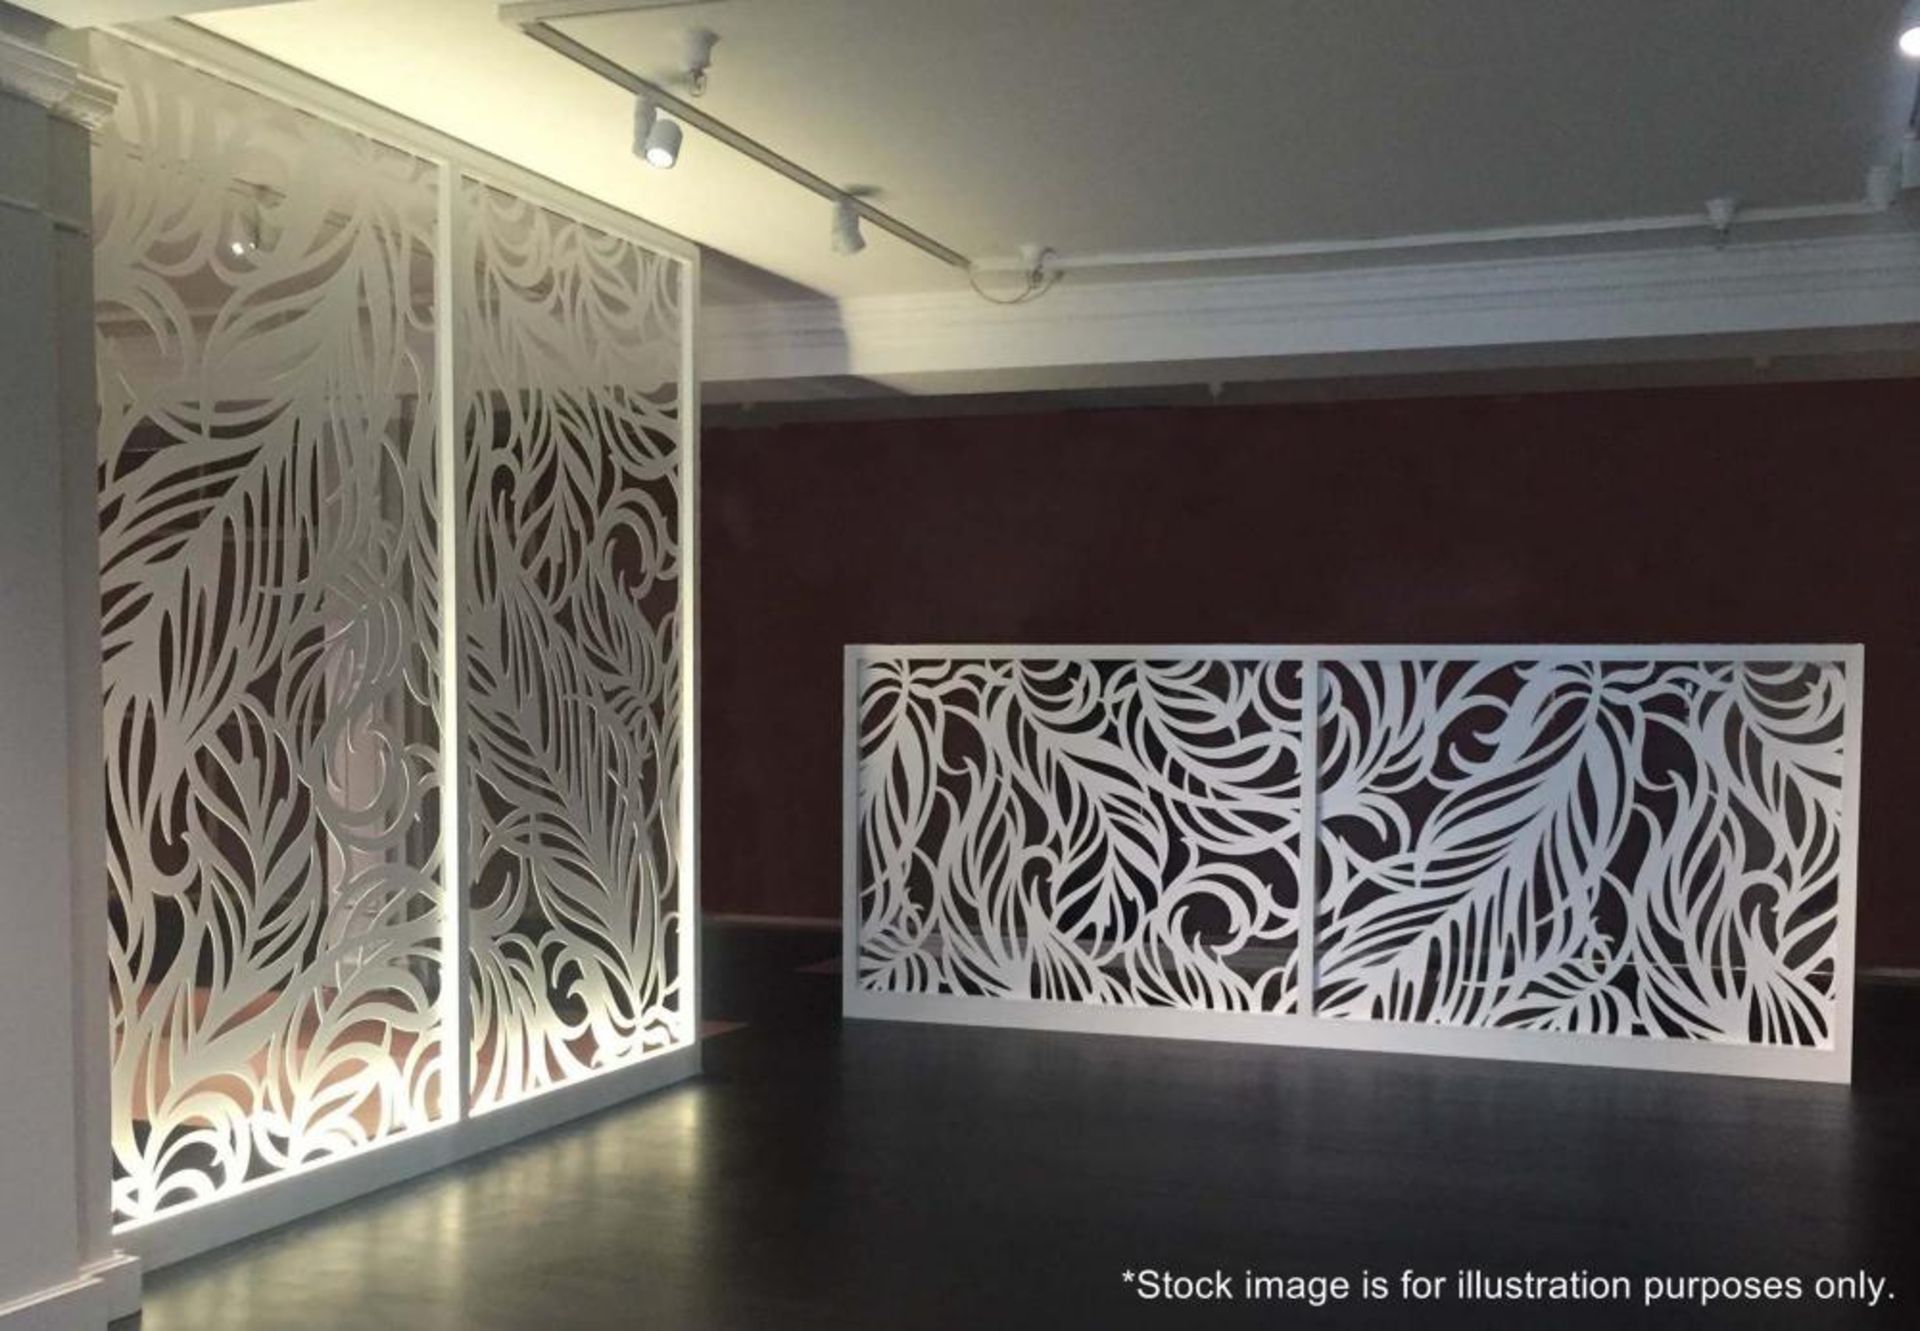 A Pair Of Elegant 'Miles and Lincoln' Laser Cut Metal Room Divider Panels In A Feather Design - Image 2 of 5